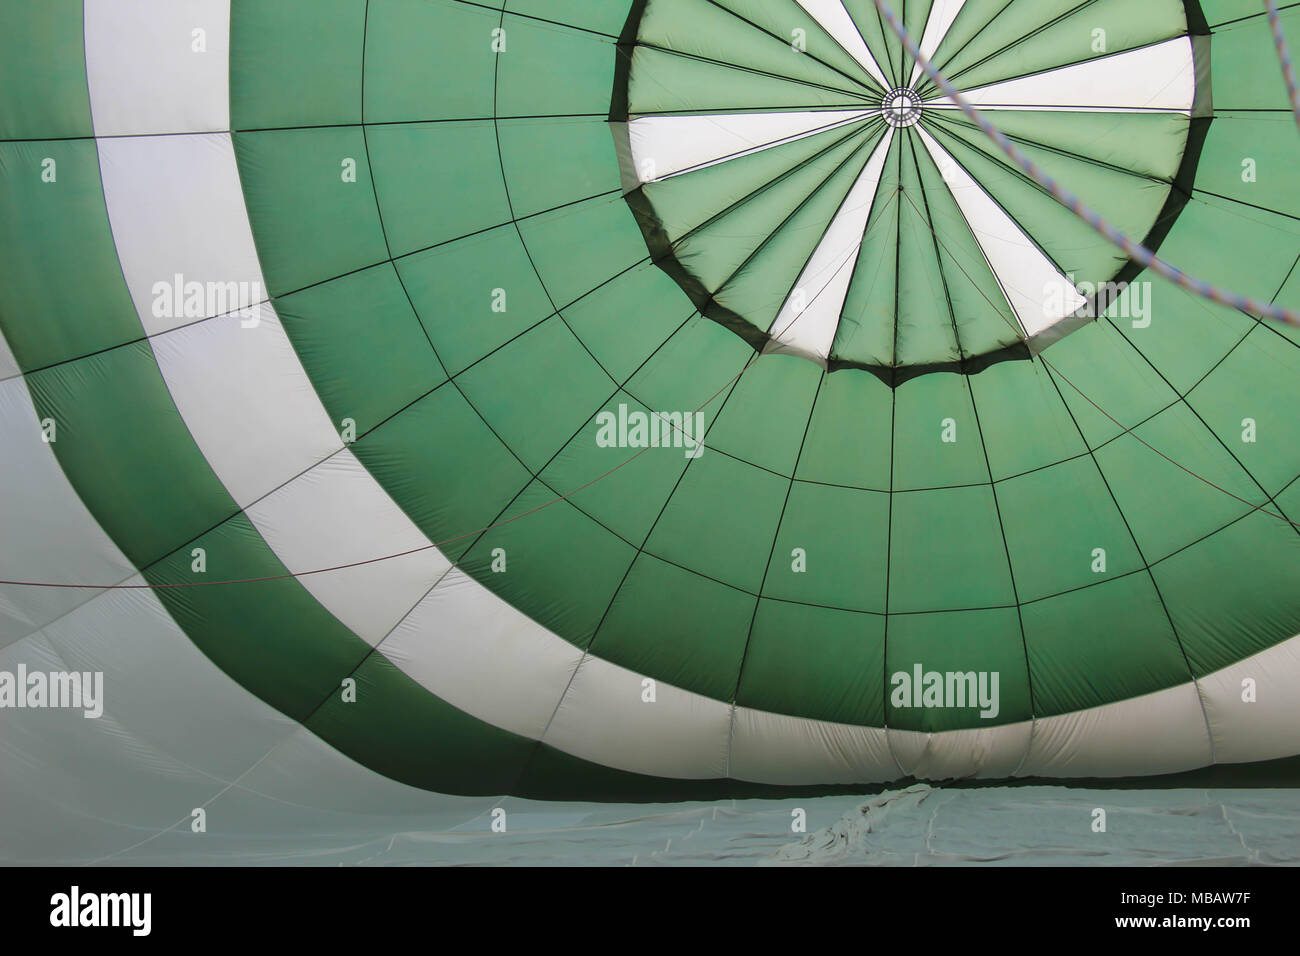 inside of a green and white hot air balloon as it inflates Stock Photo